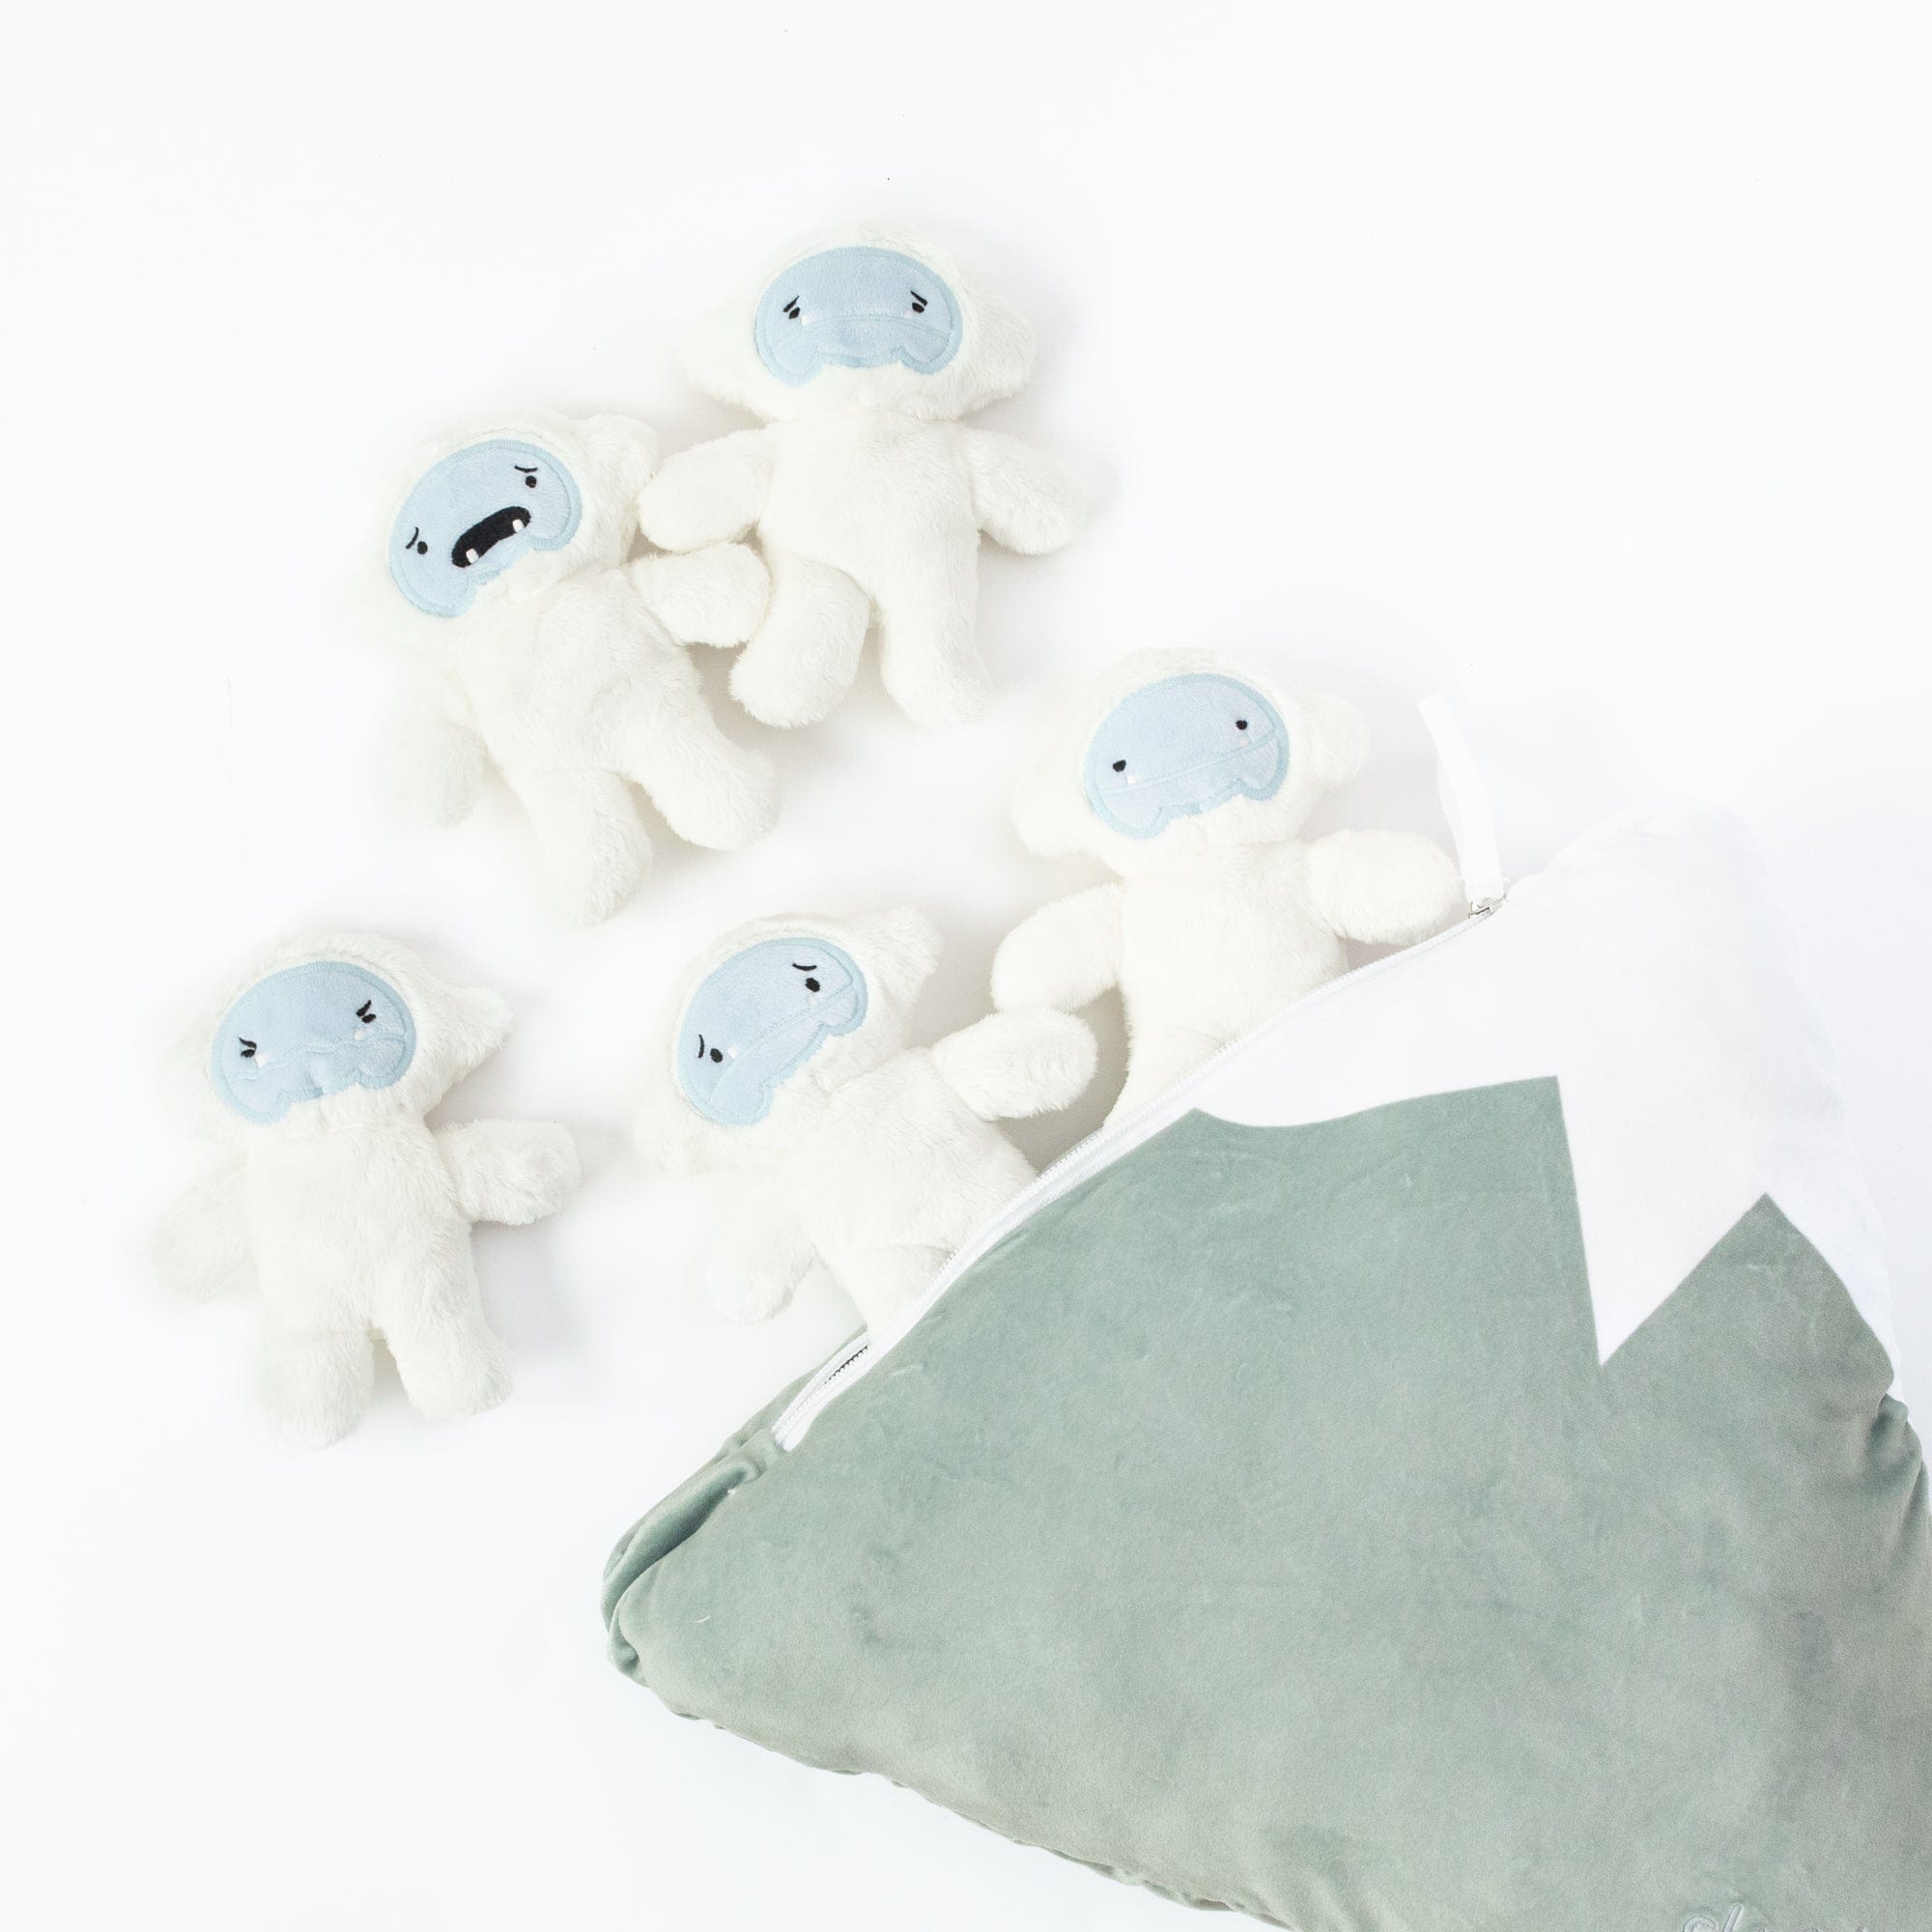 The Feels Pillow Set - View Product